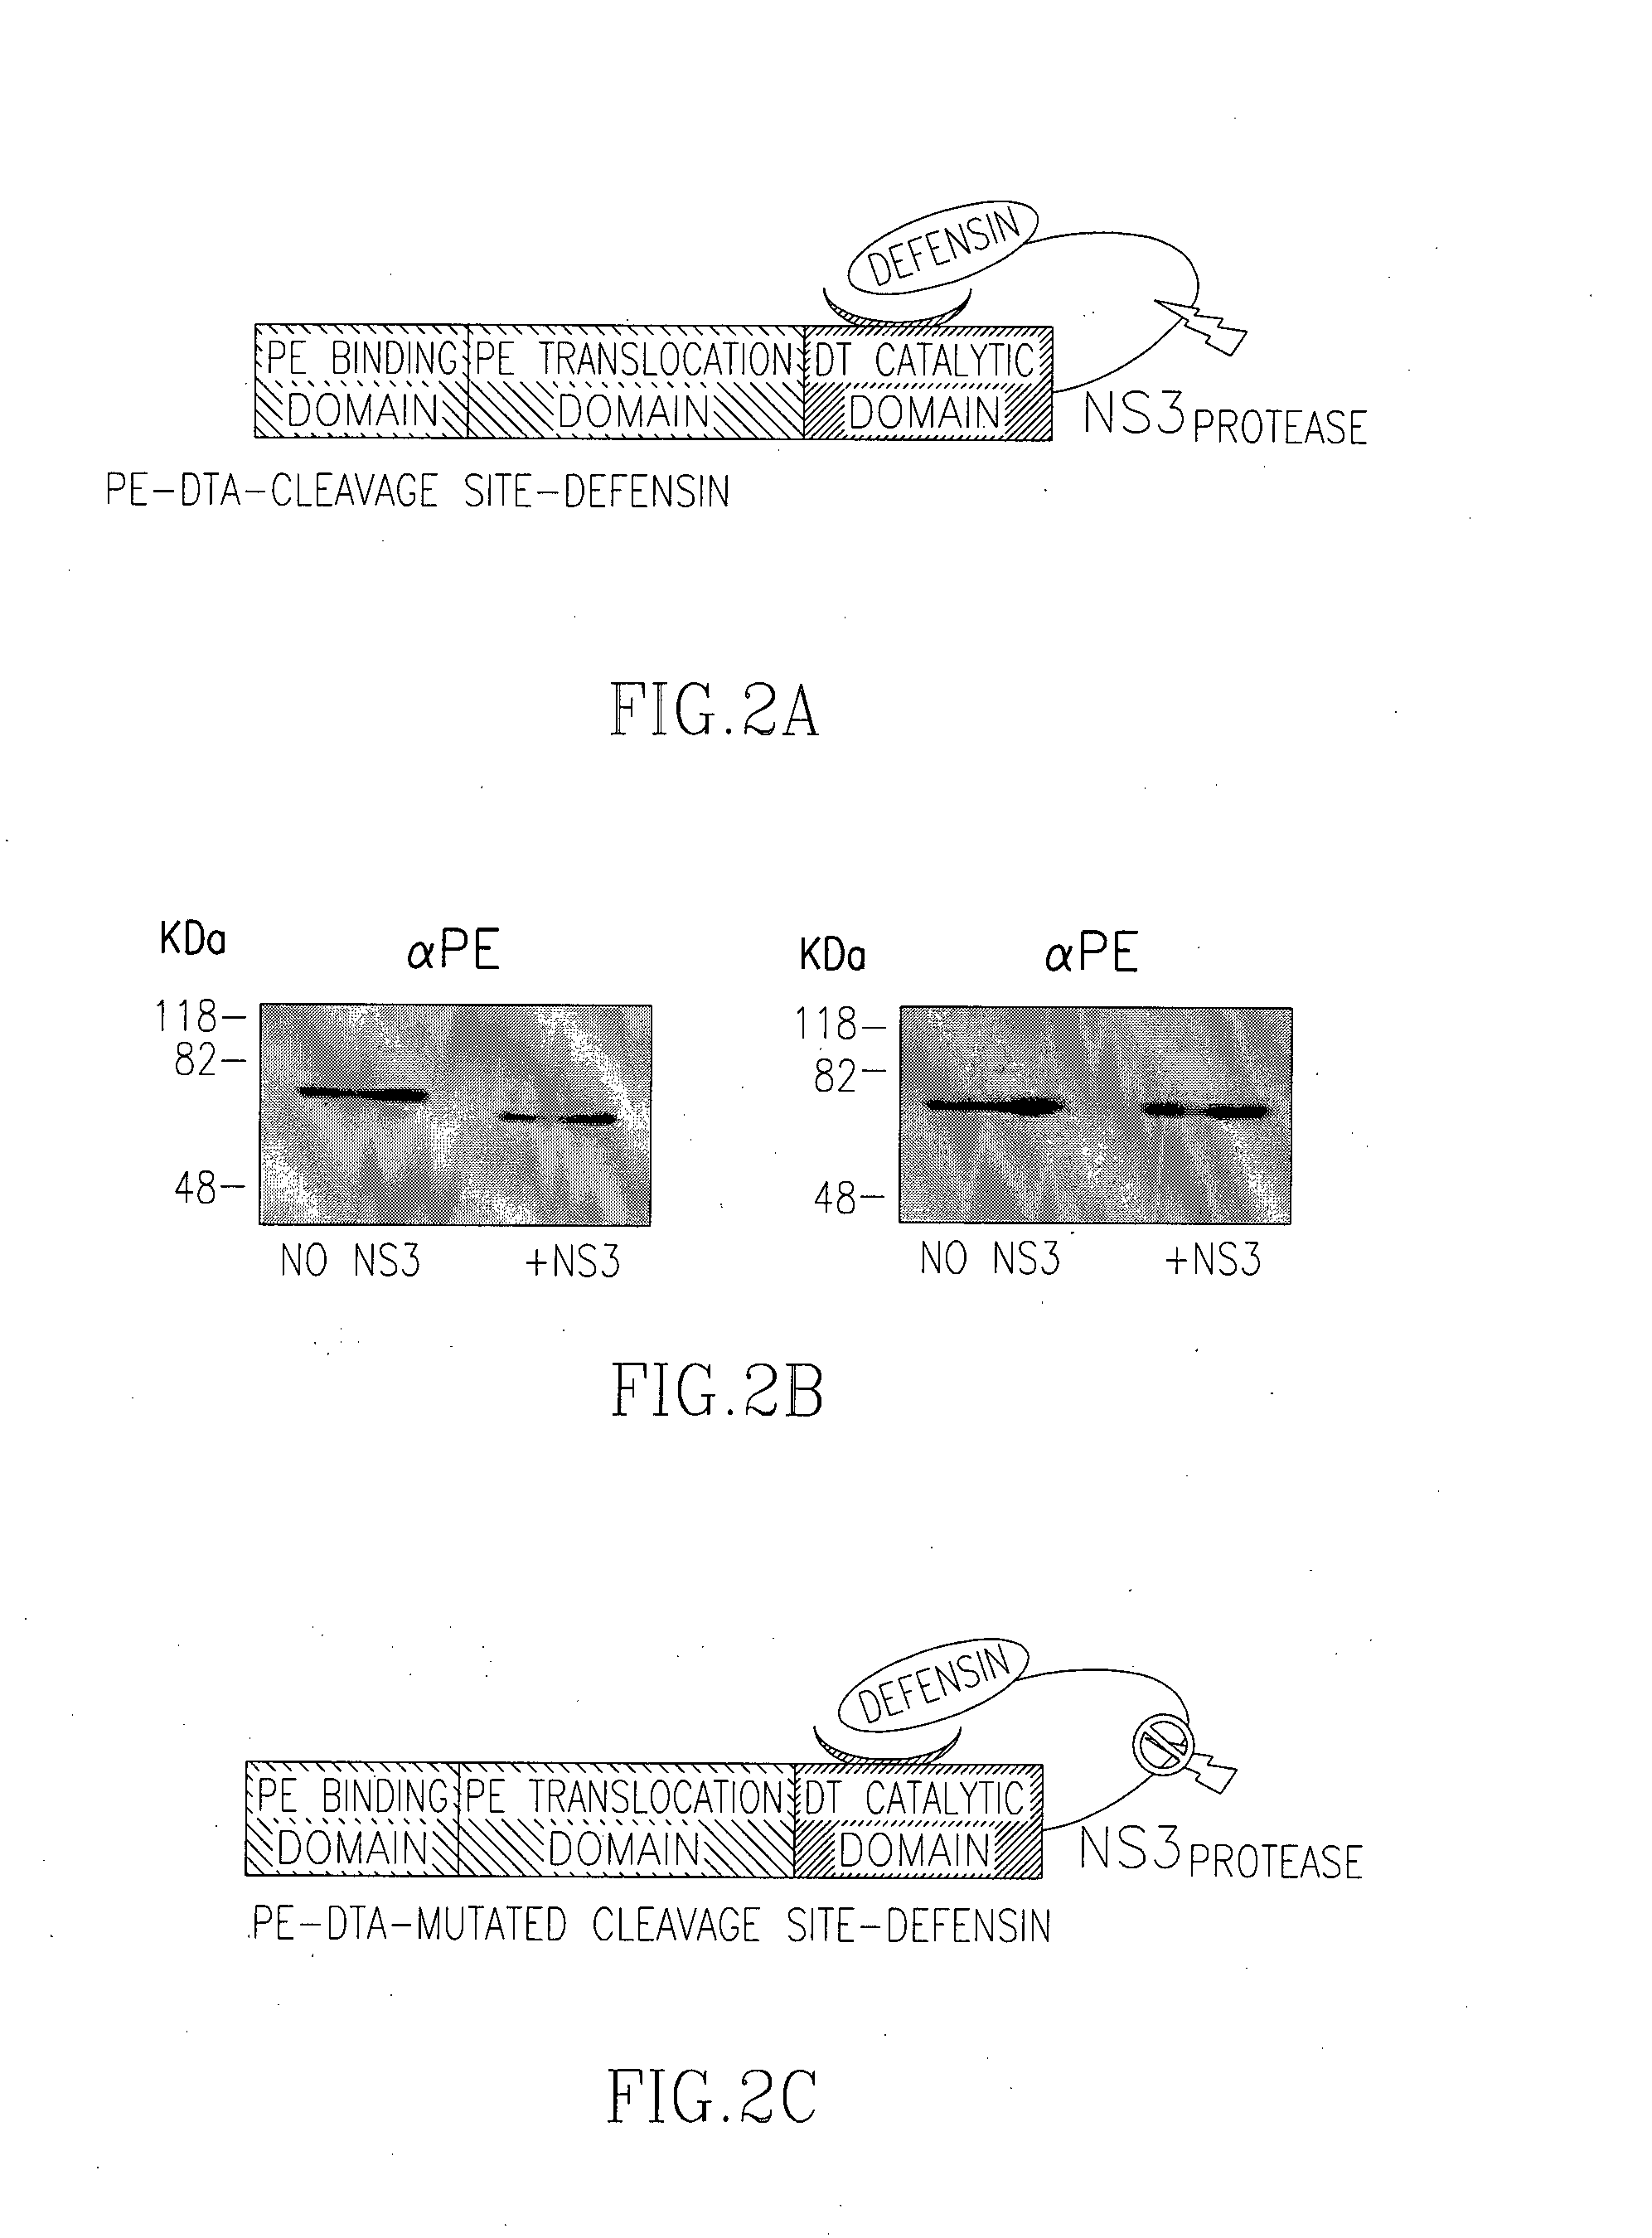 Activatable toxin complexes comprising a cleavable inhibitory peptide